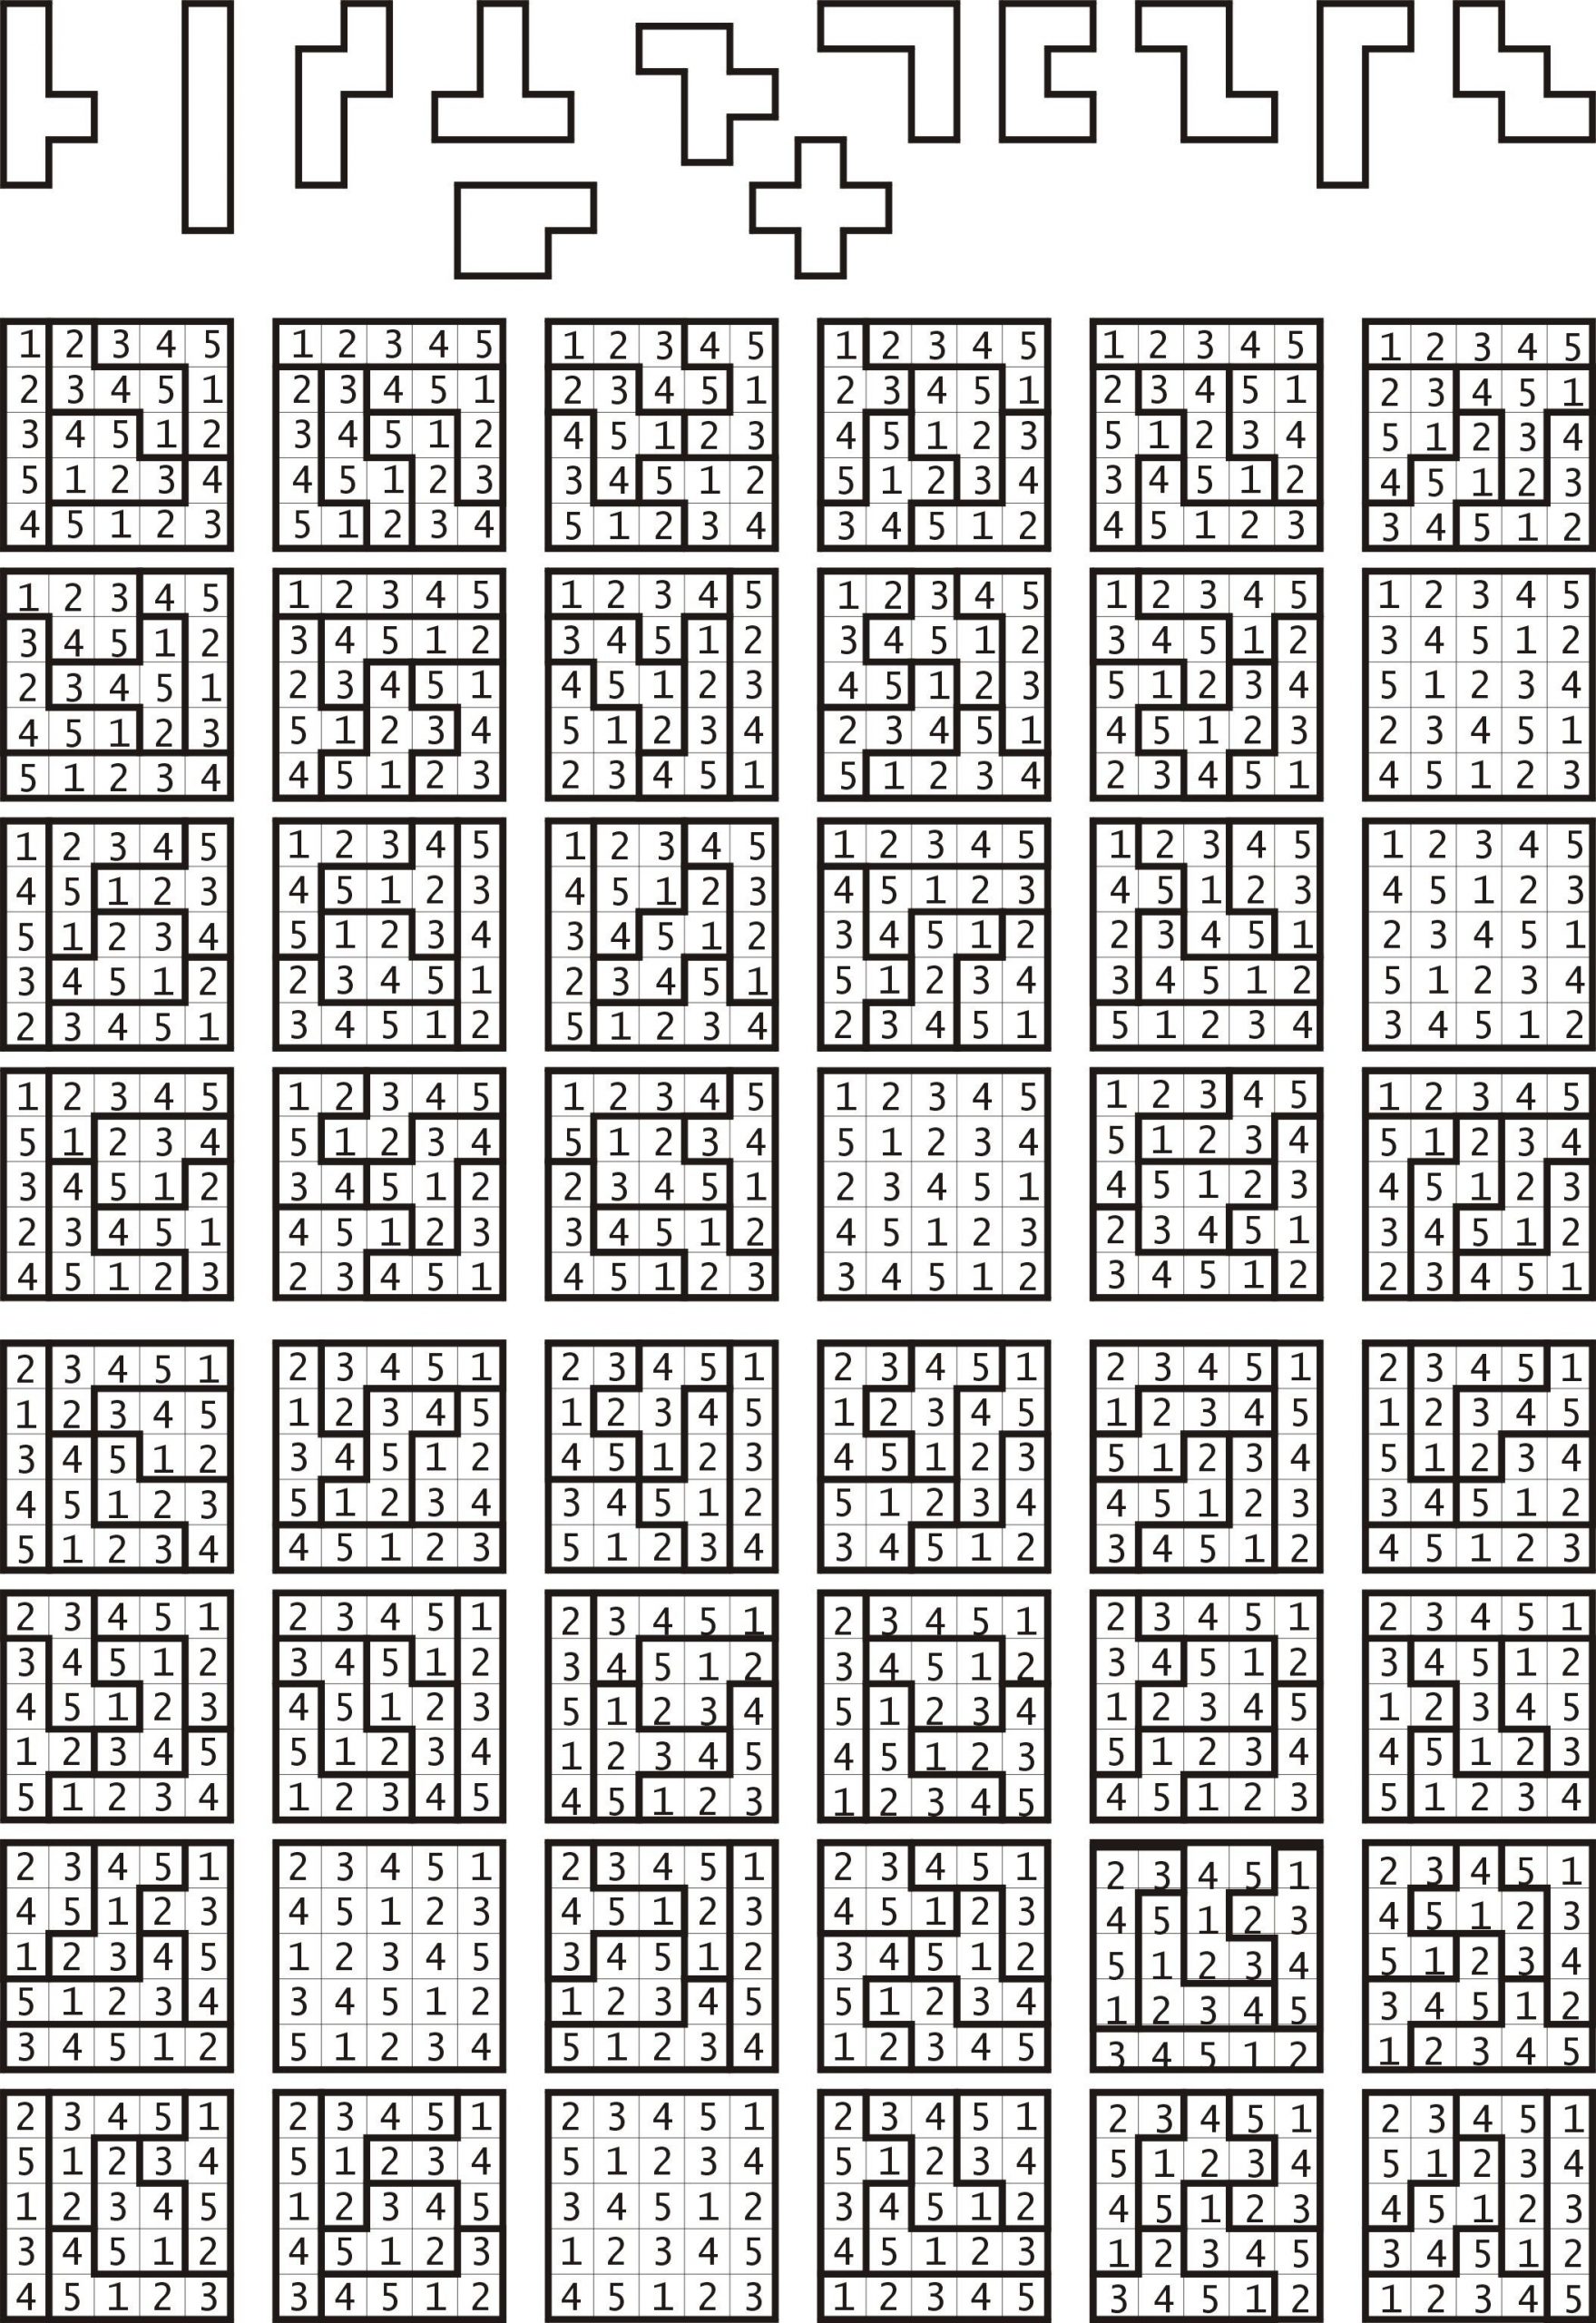 Possible 5X5 Grids Of Numbers 1 To 5 Mimicking Sudoku Puzzle